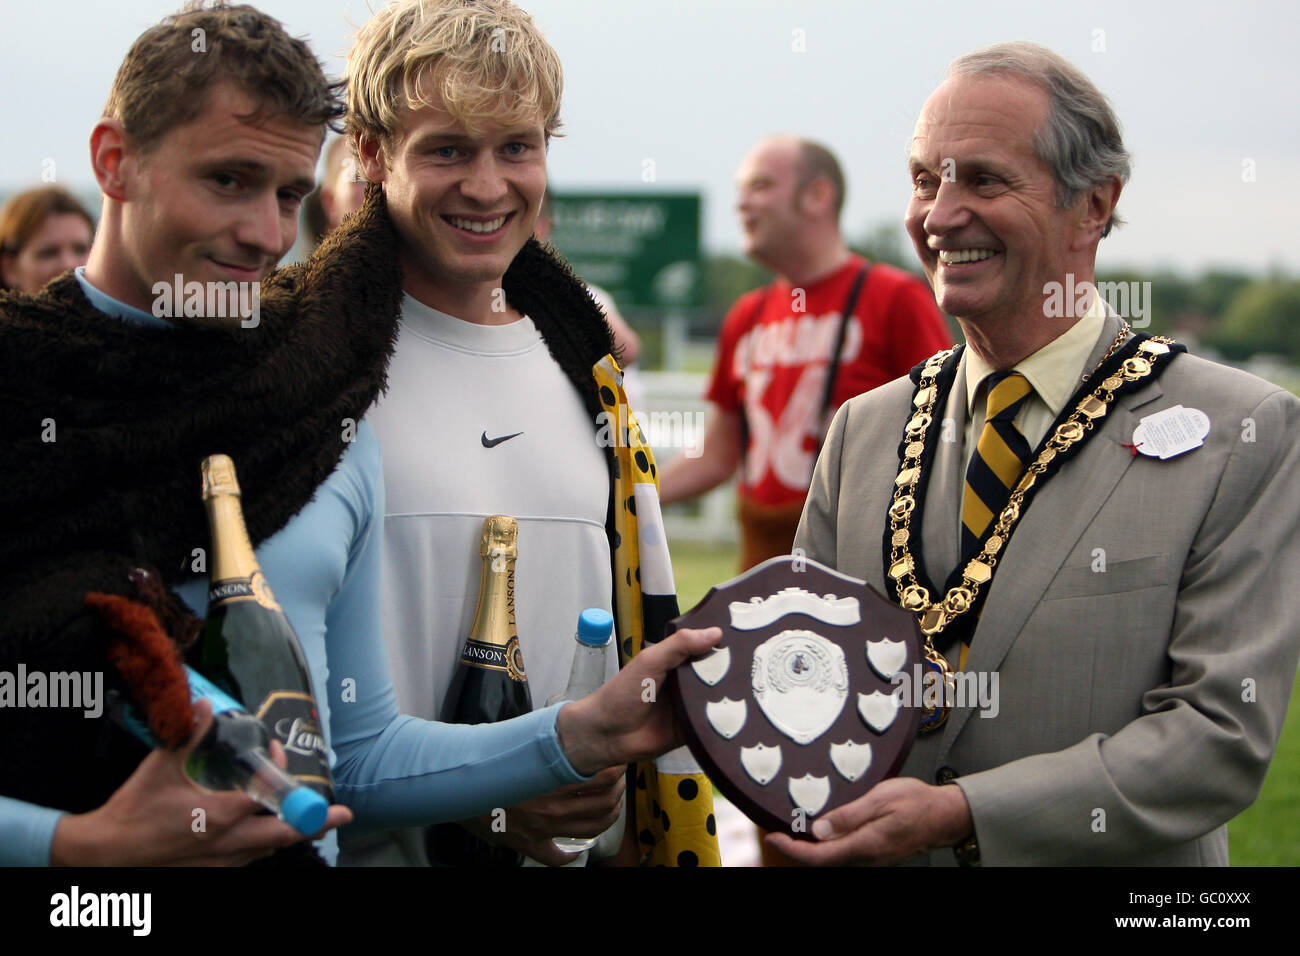 Neigh Chance receive their trophy after winning the Mayor's pantomime horse race Stock Photo